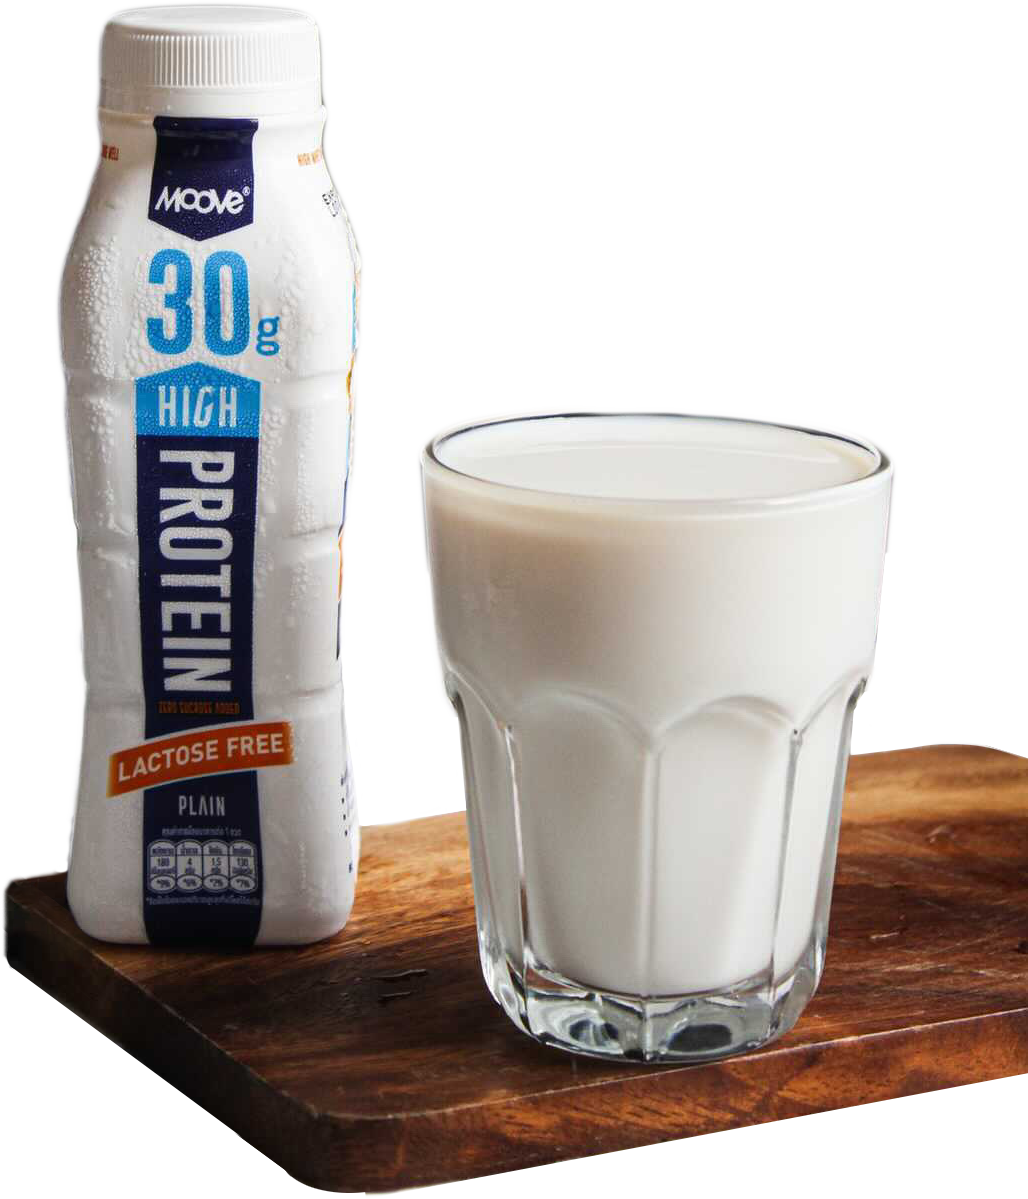 Bottle of high protein milk lactose free Plain flavour with glass